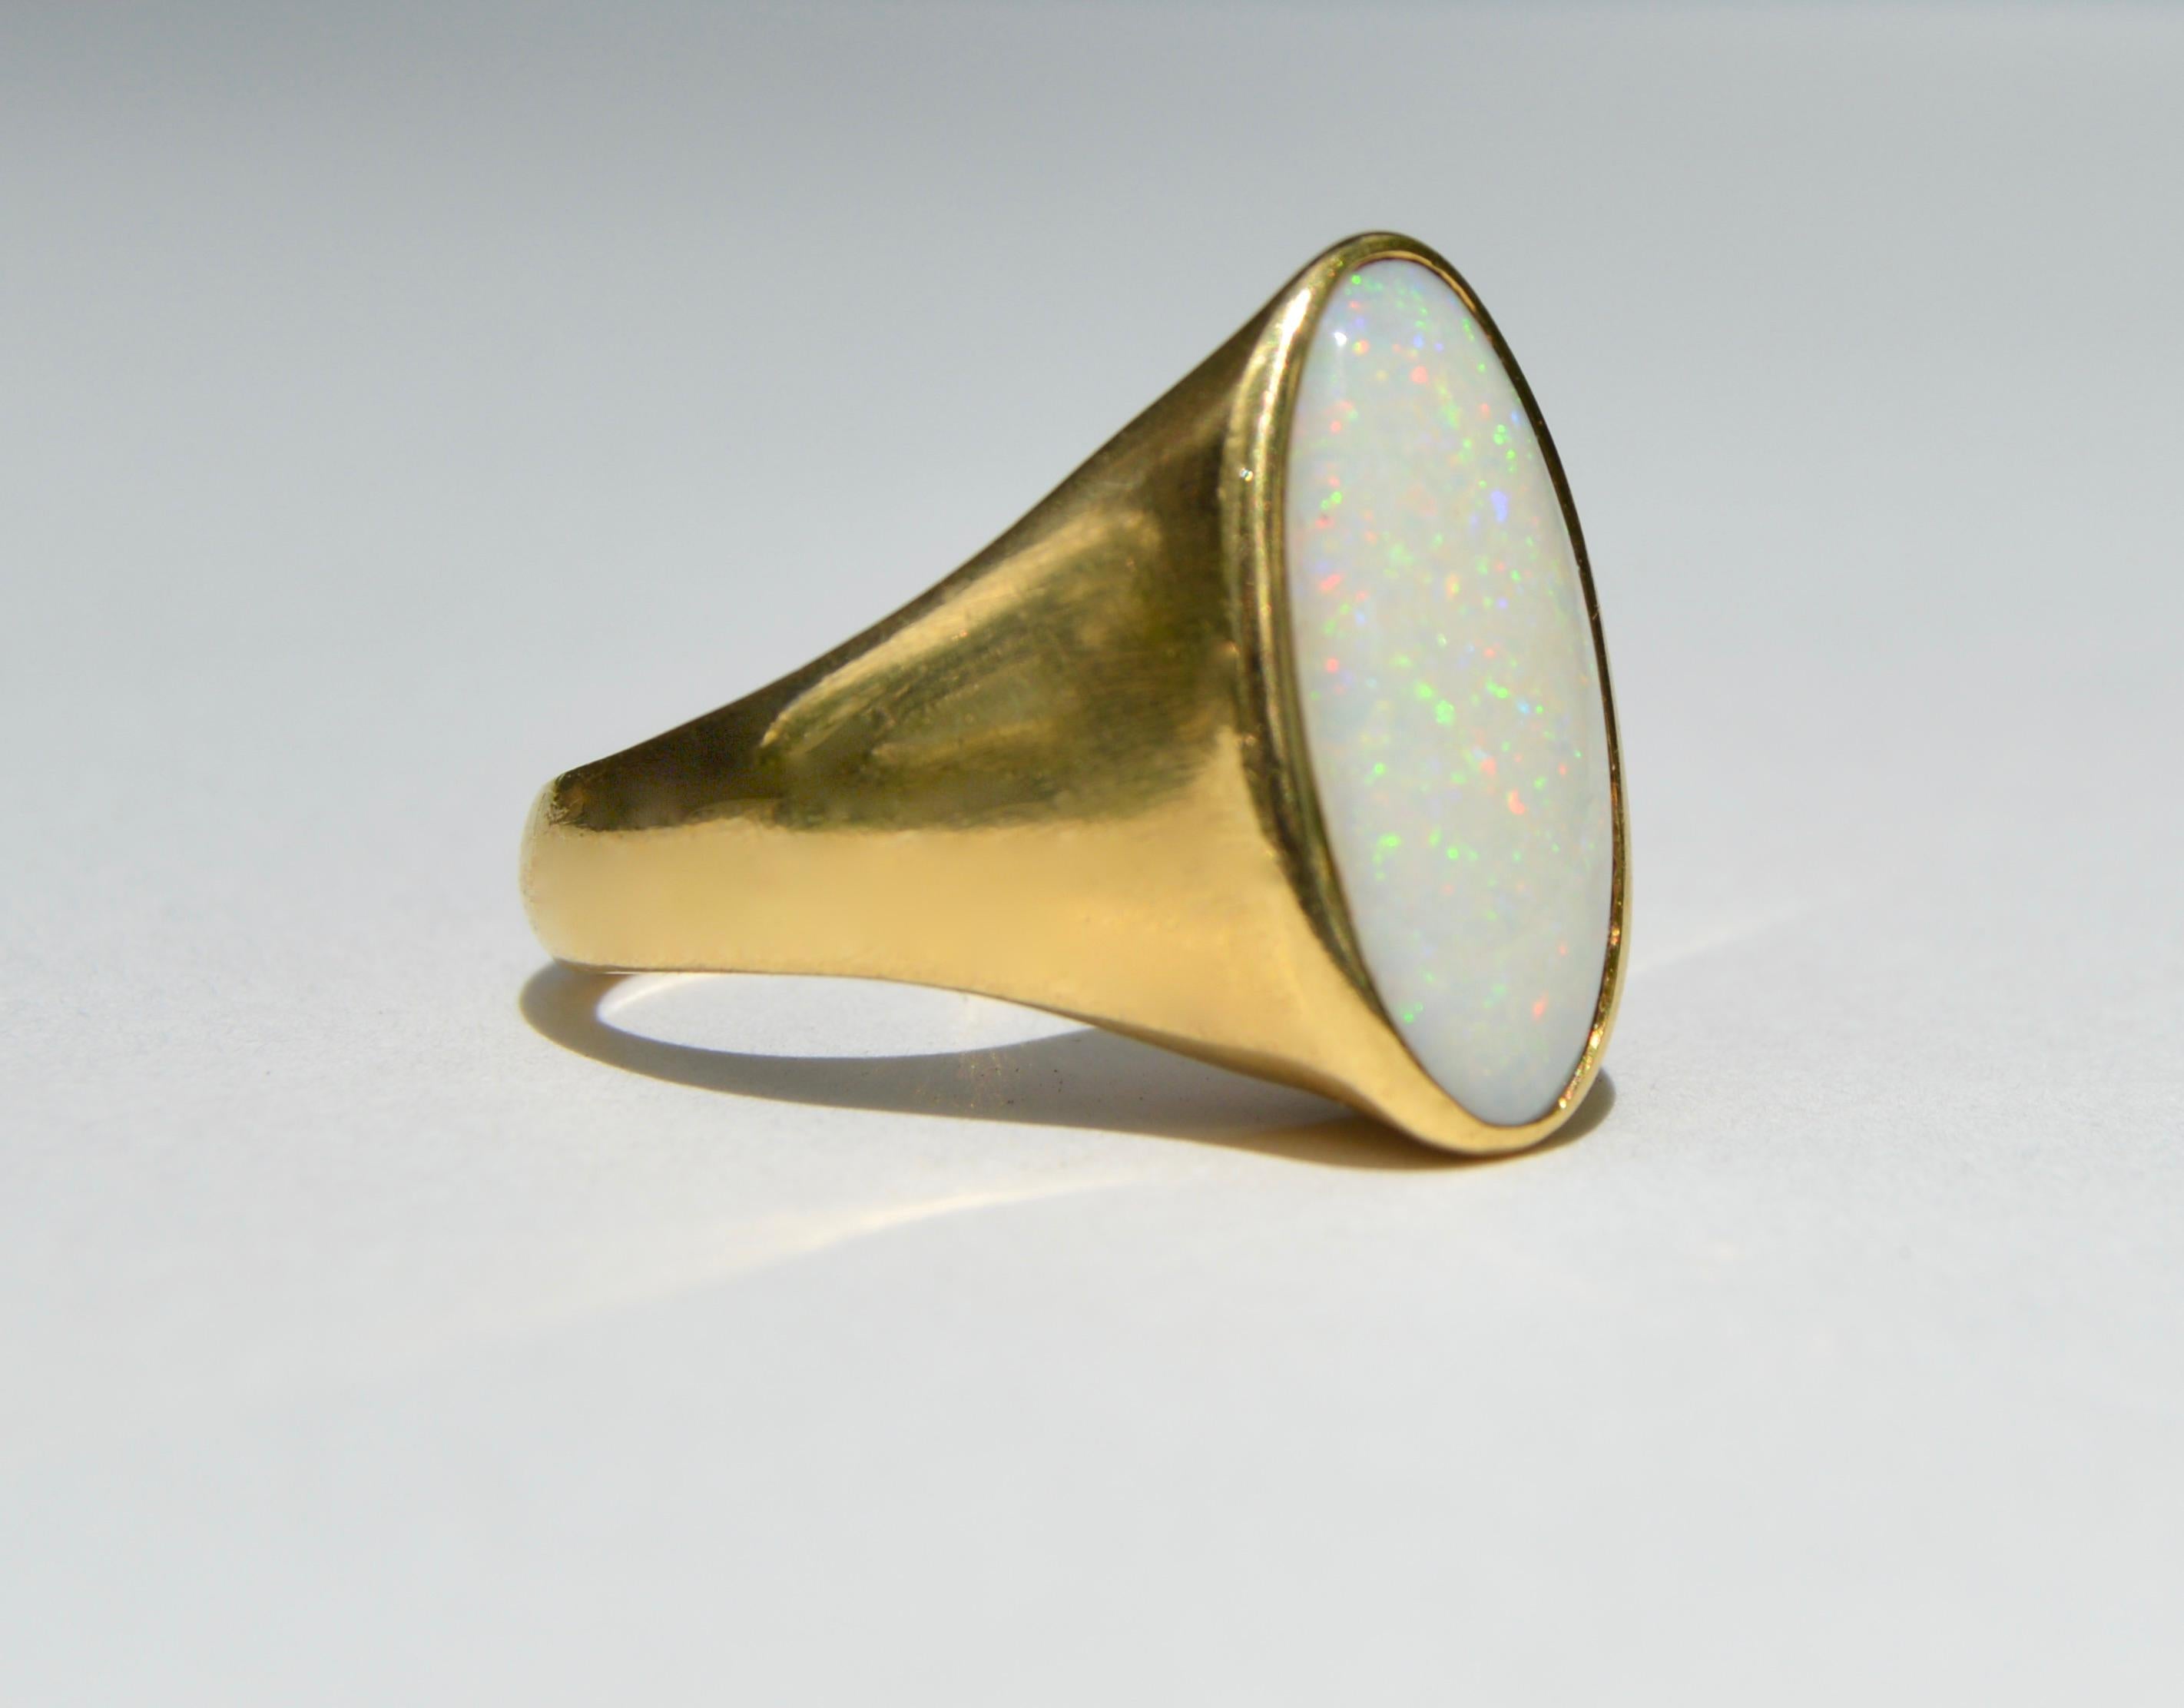 Beautiful Midcentury era circa 1960s 14K yellow gold natural opal oval cabochon signet ring. Size 7, can be resized by a jeweler. Ring is unmarked but tested as solid 14K gold. The rainbow flecked fiery opal measures 17x8mm. In very good condition.